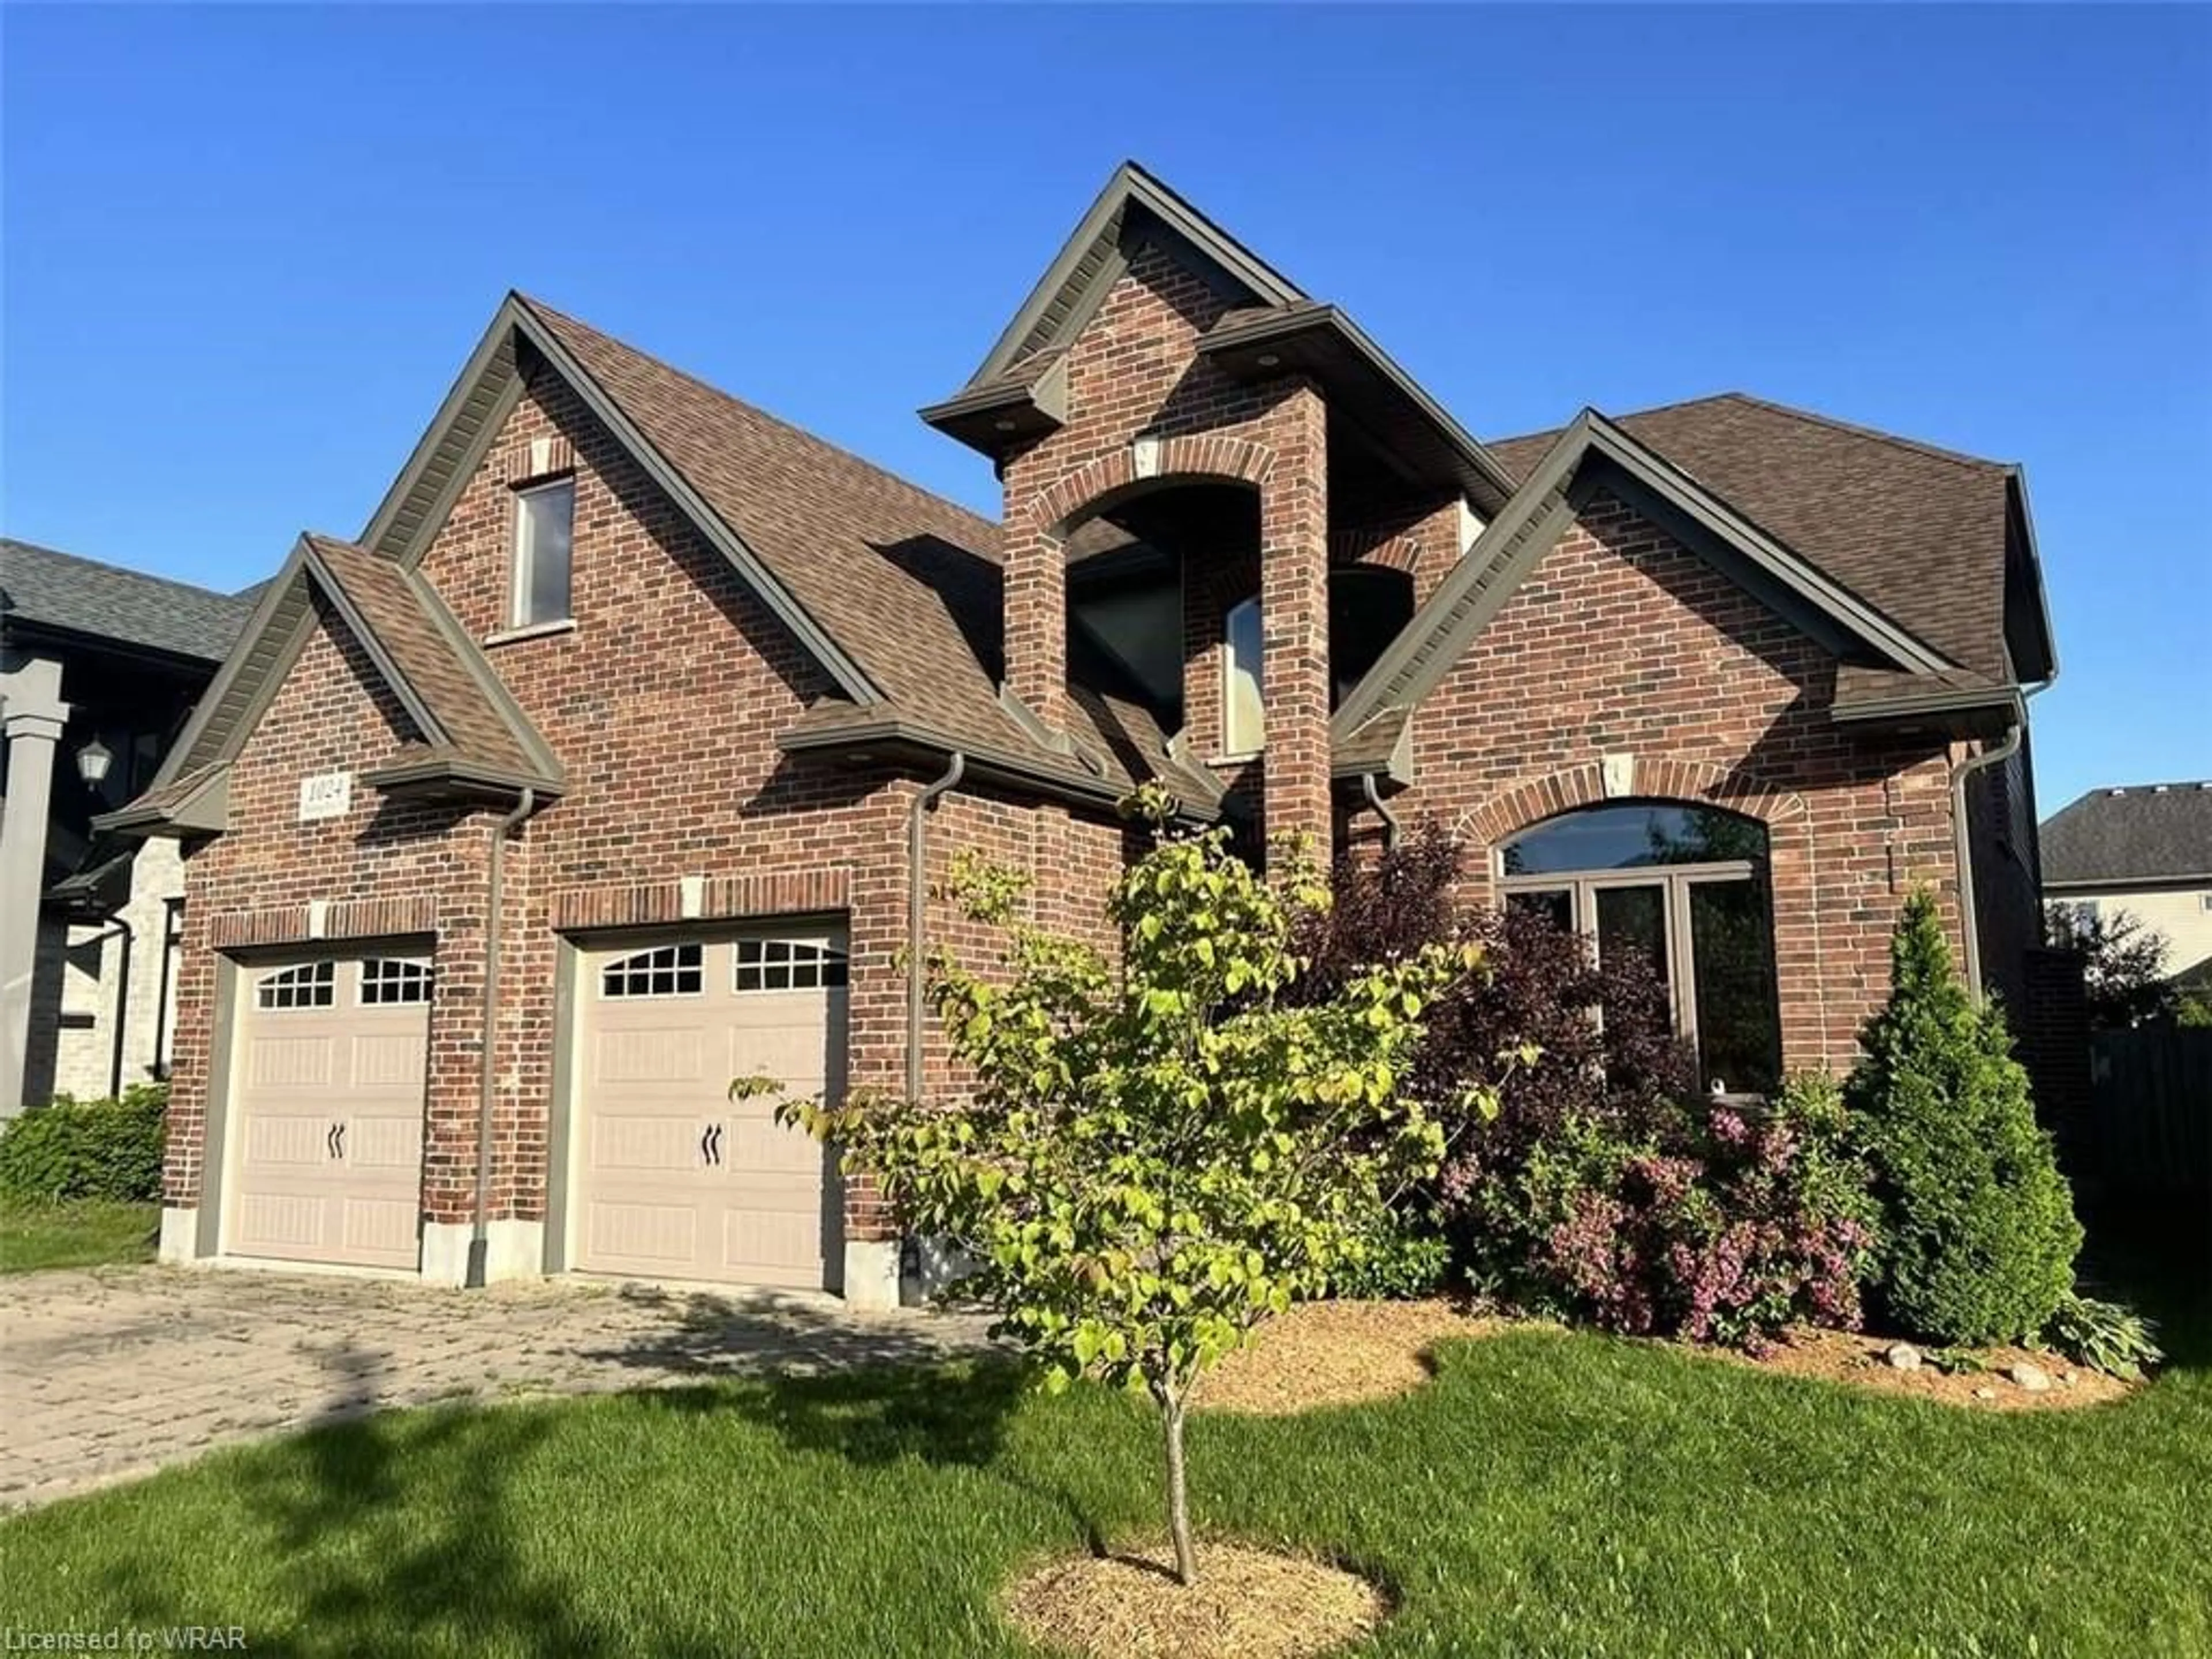 Home with brick exterior material for 1024 Medway Park Dr, London Ontario N6G 0E4